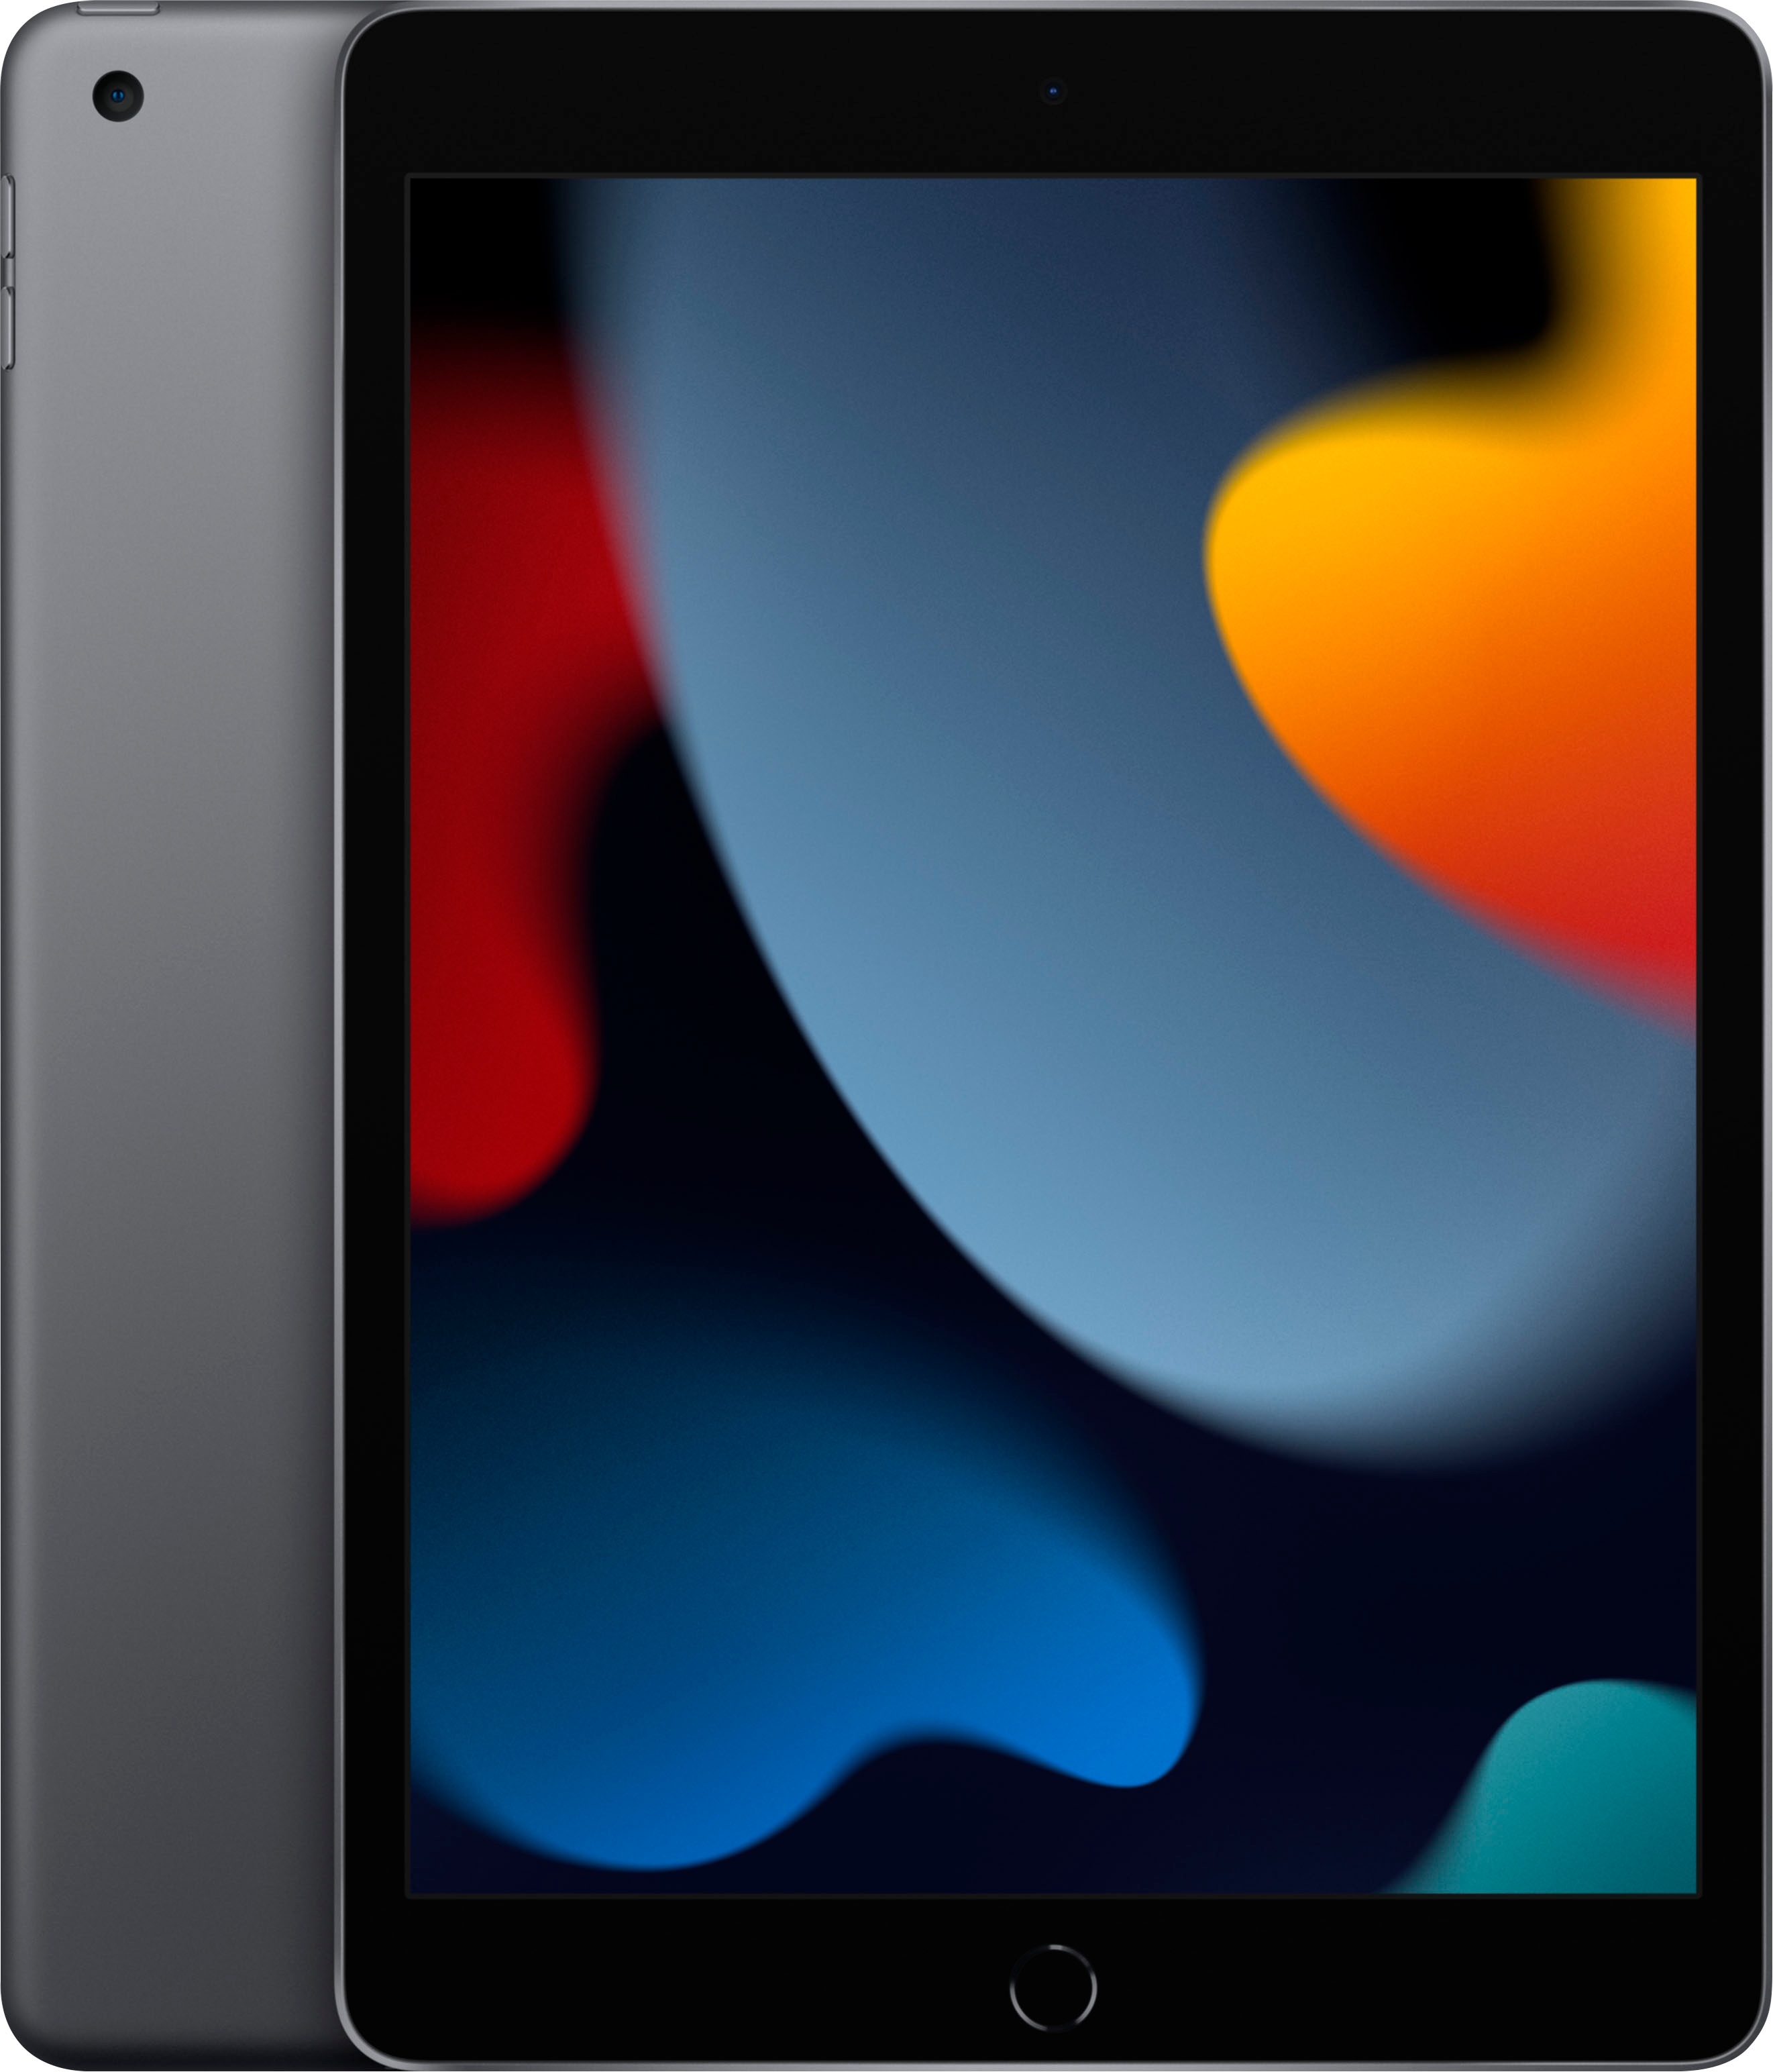 Apple - iPad (9th Generation) with Wi-Fi 64GB - Space Gray Best Deals and Price History at JoinHoney.com Honey